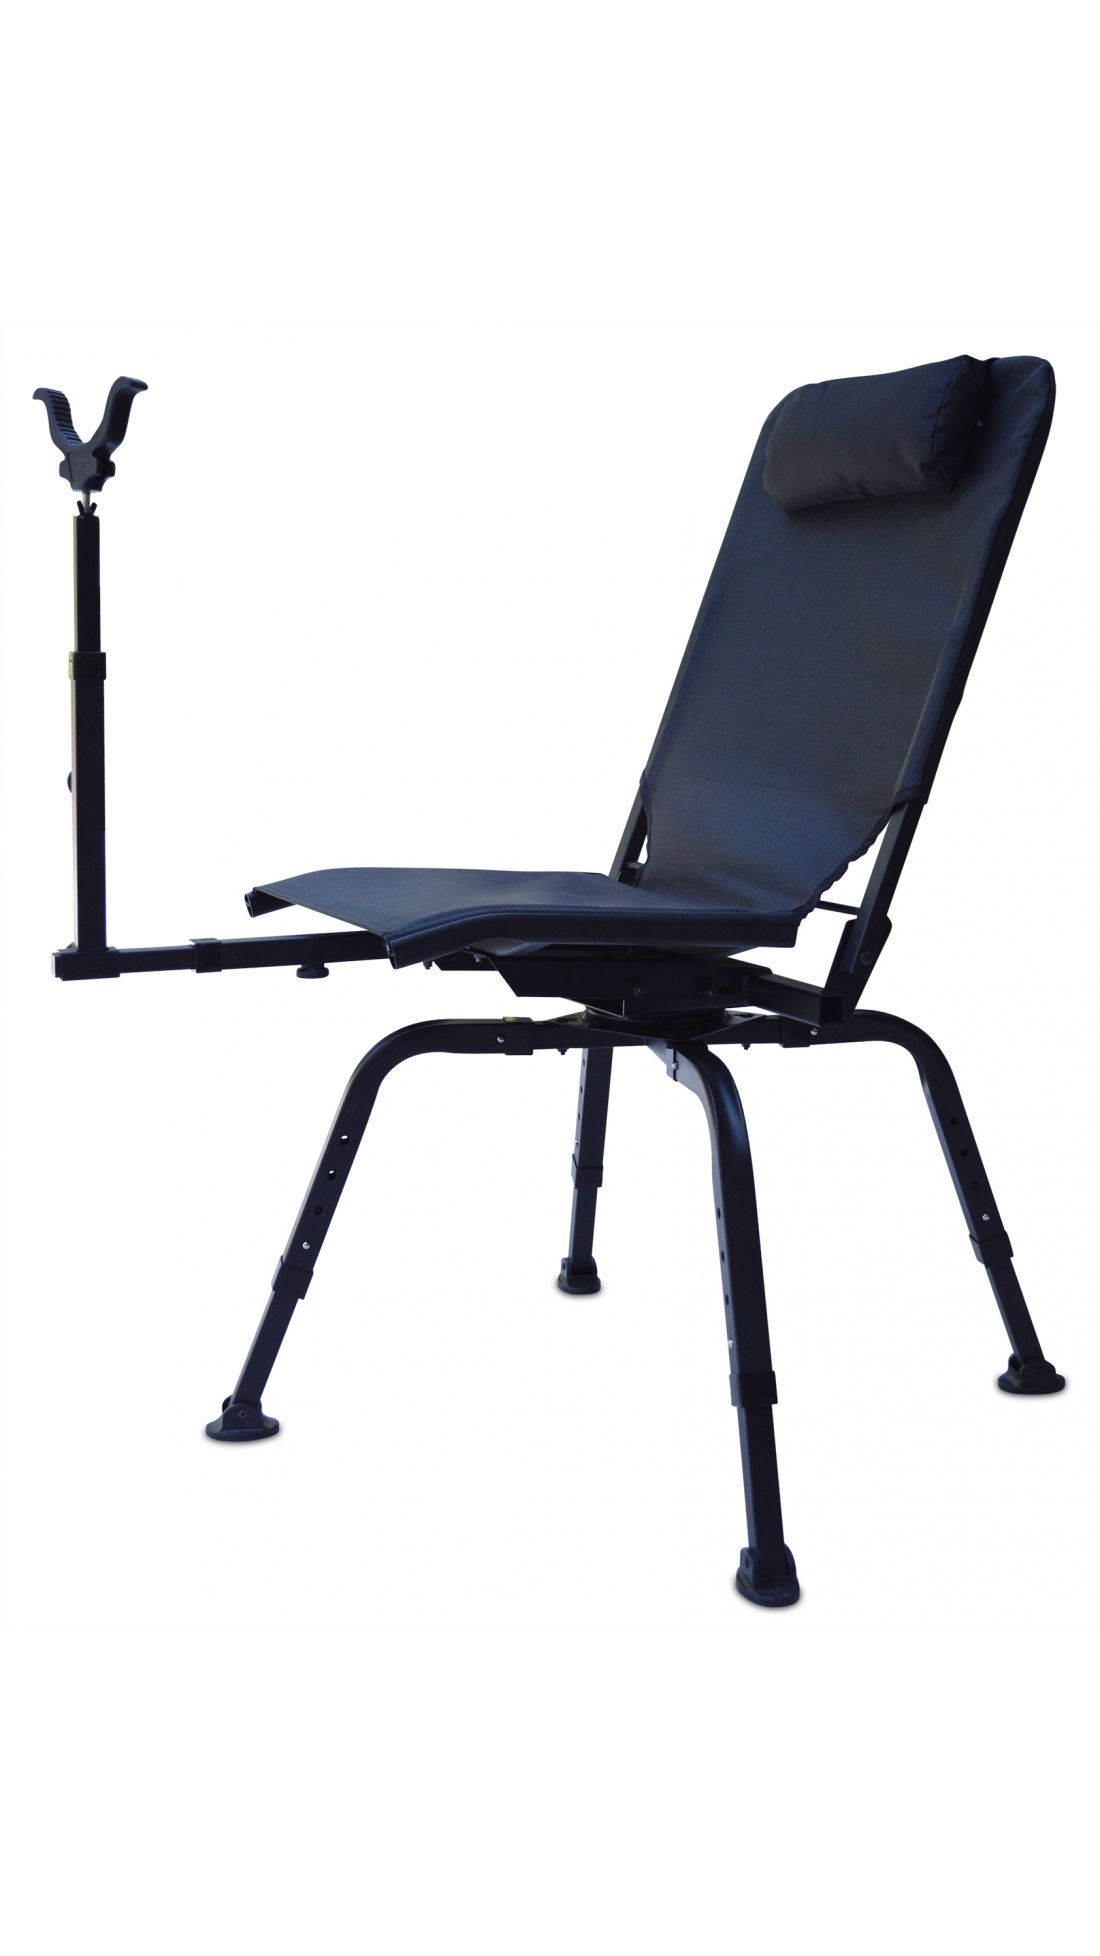 BenchMaster Rifle Rest Perfect Shot Shooting Chair | Free Shipping over